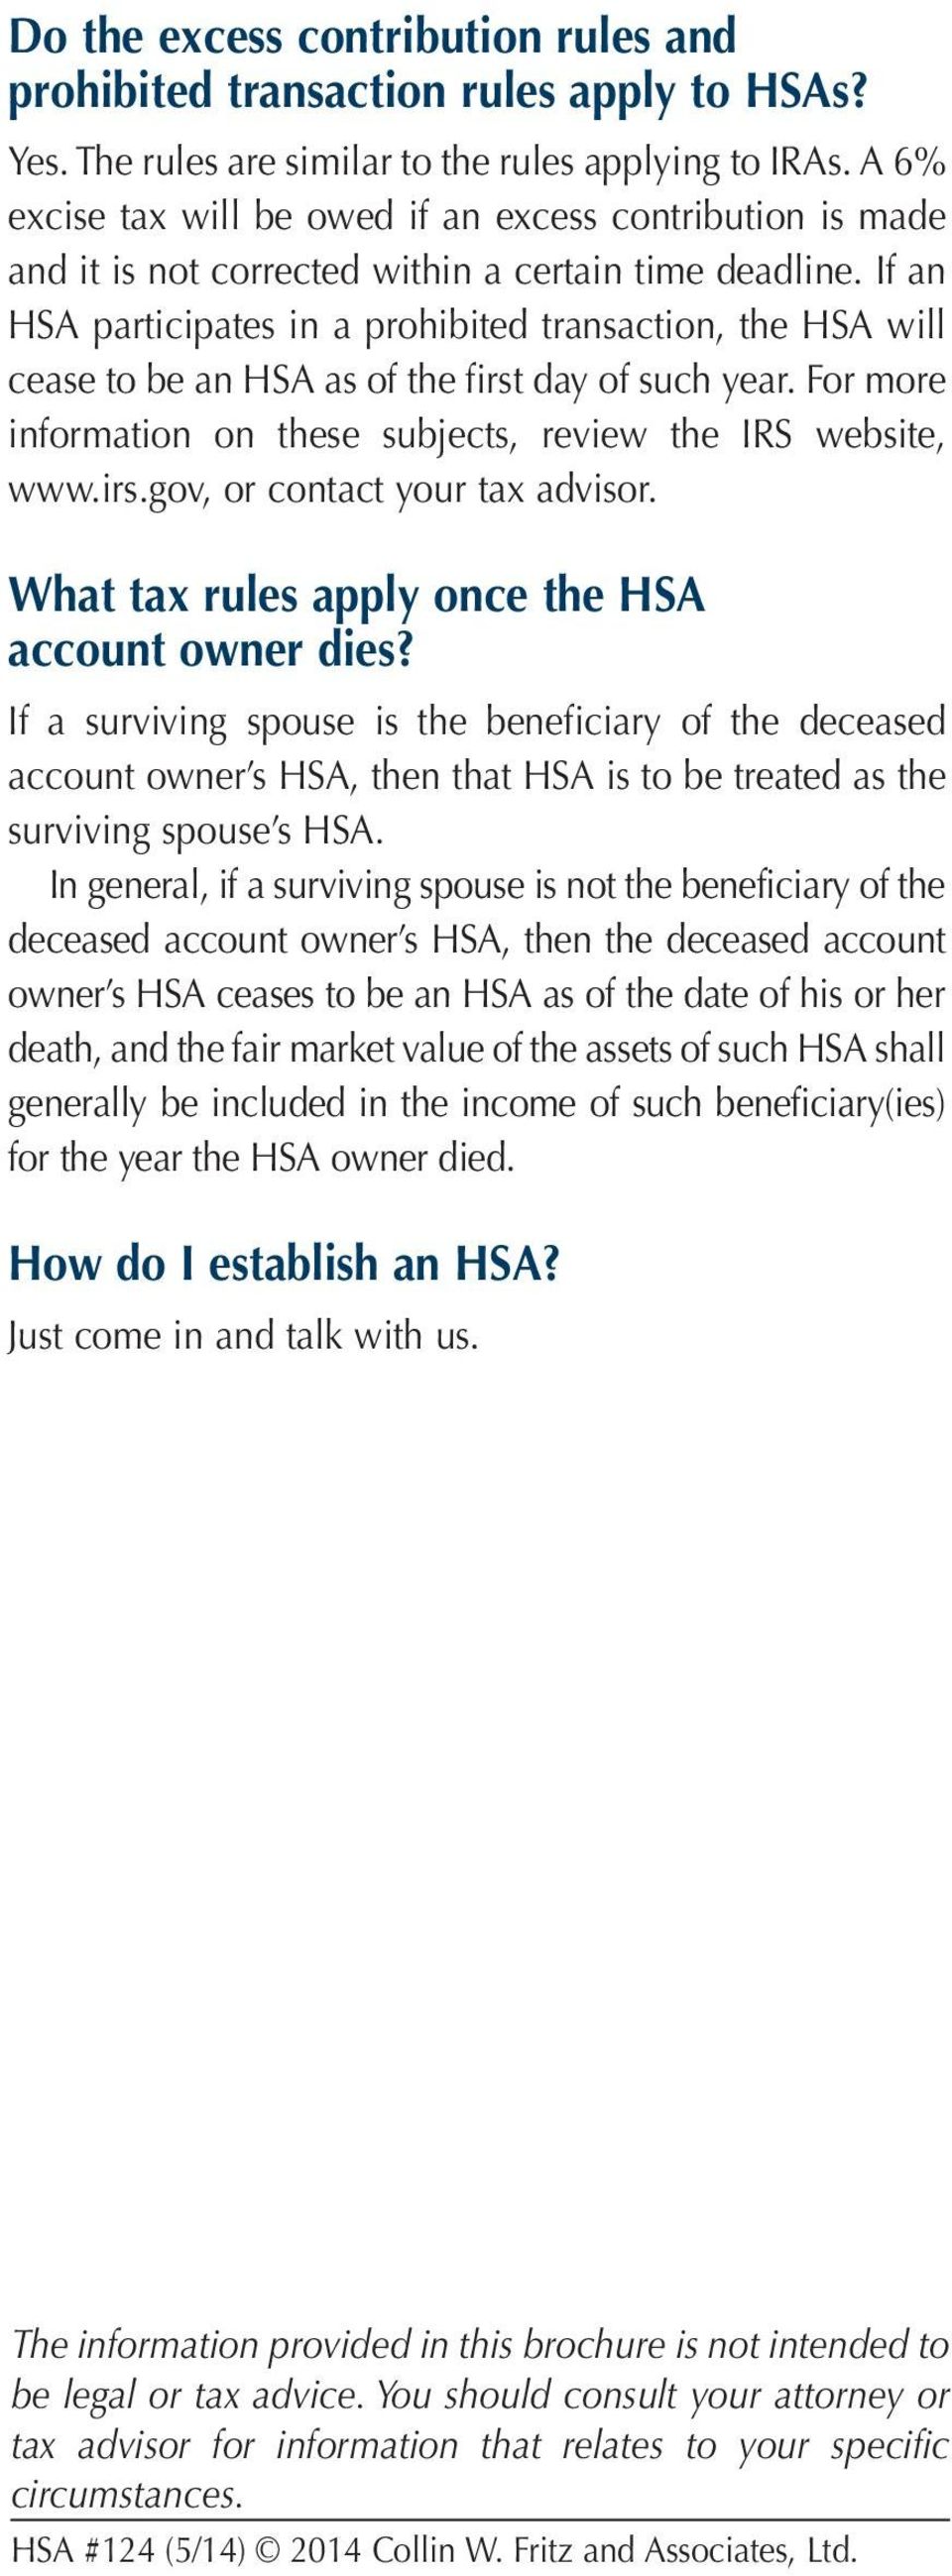 If an HSA participates in a prohibited transaction, the HSA will cease to be an HSA as of the first day of such year. For more information on these subjects, review the IRS website, www.irs.gov, or contact your tax advisor.